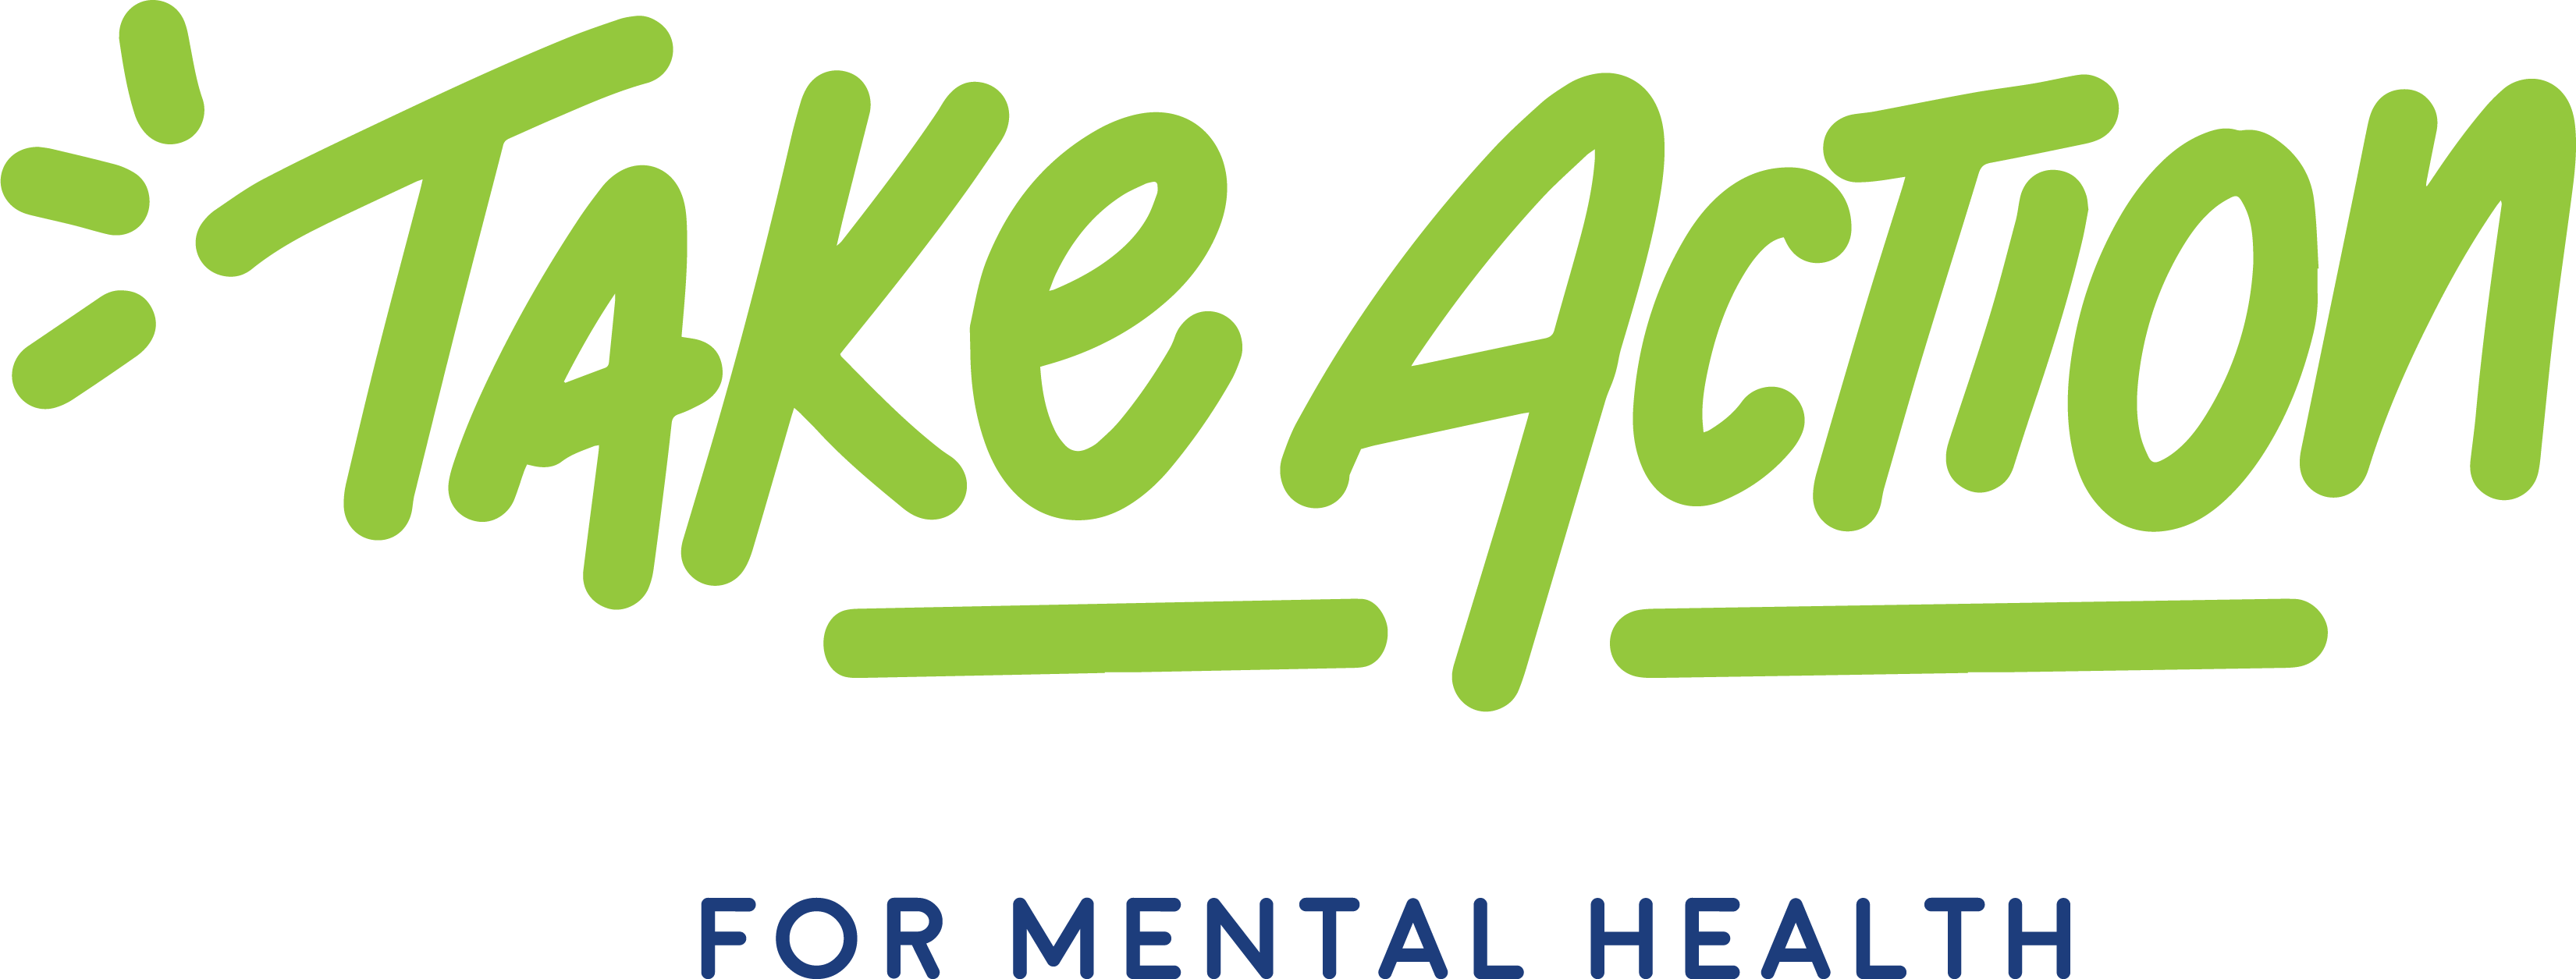 Take Action For Mental Health